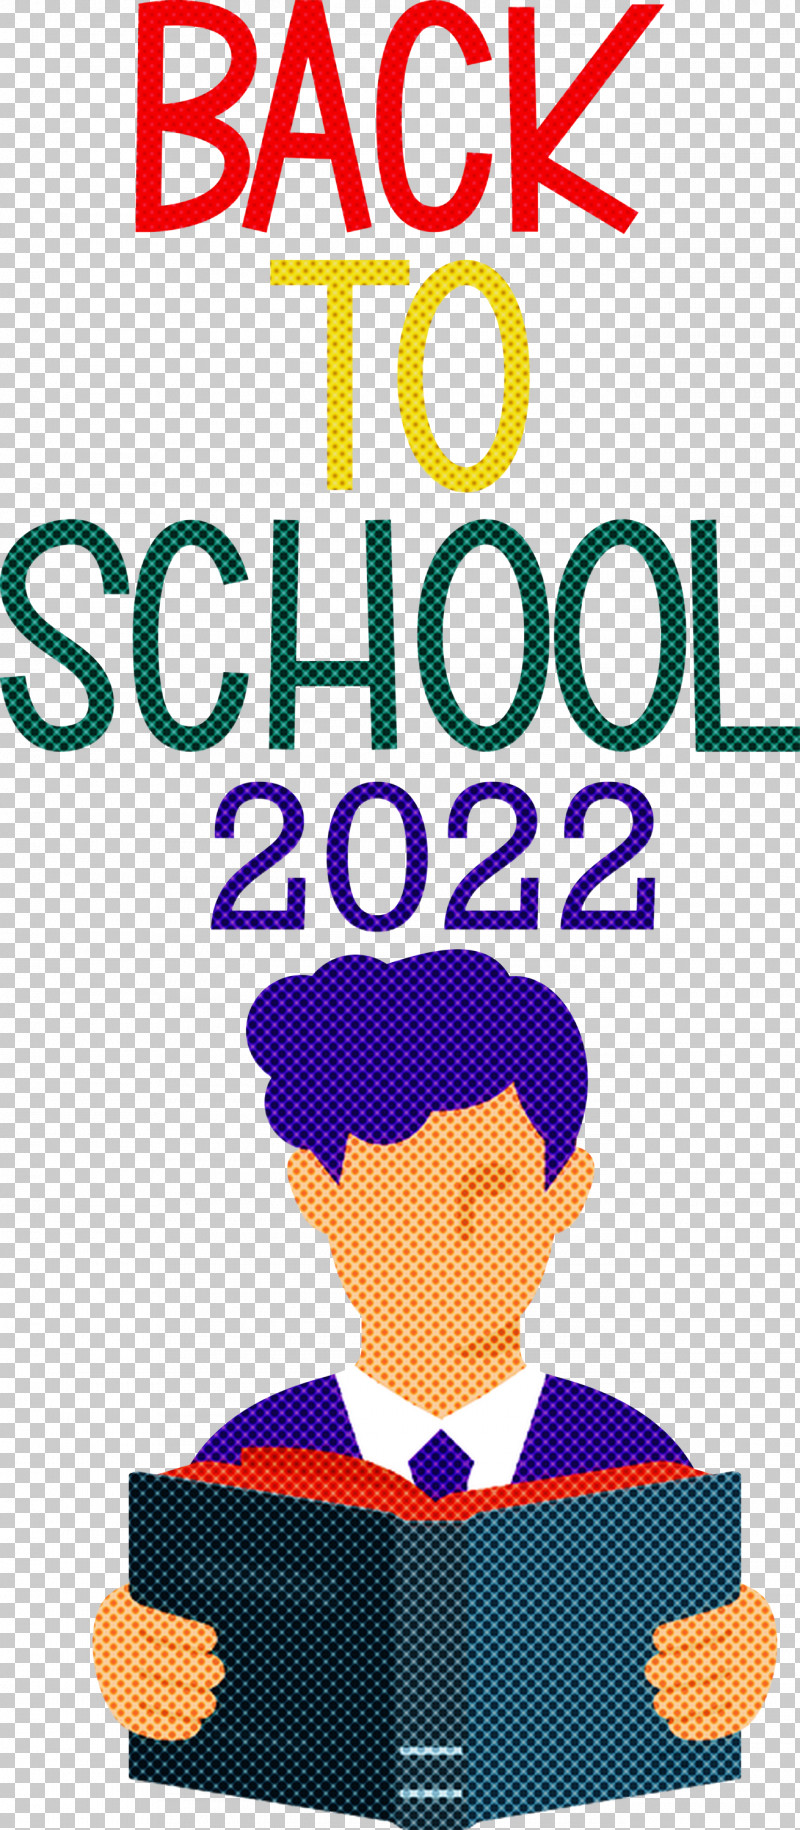 Back To School 2022 PNG, Clipart, Behavior, Geometry, Headgear, Human, Line Free PNG Download